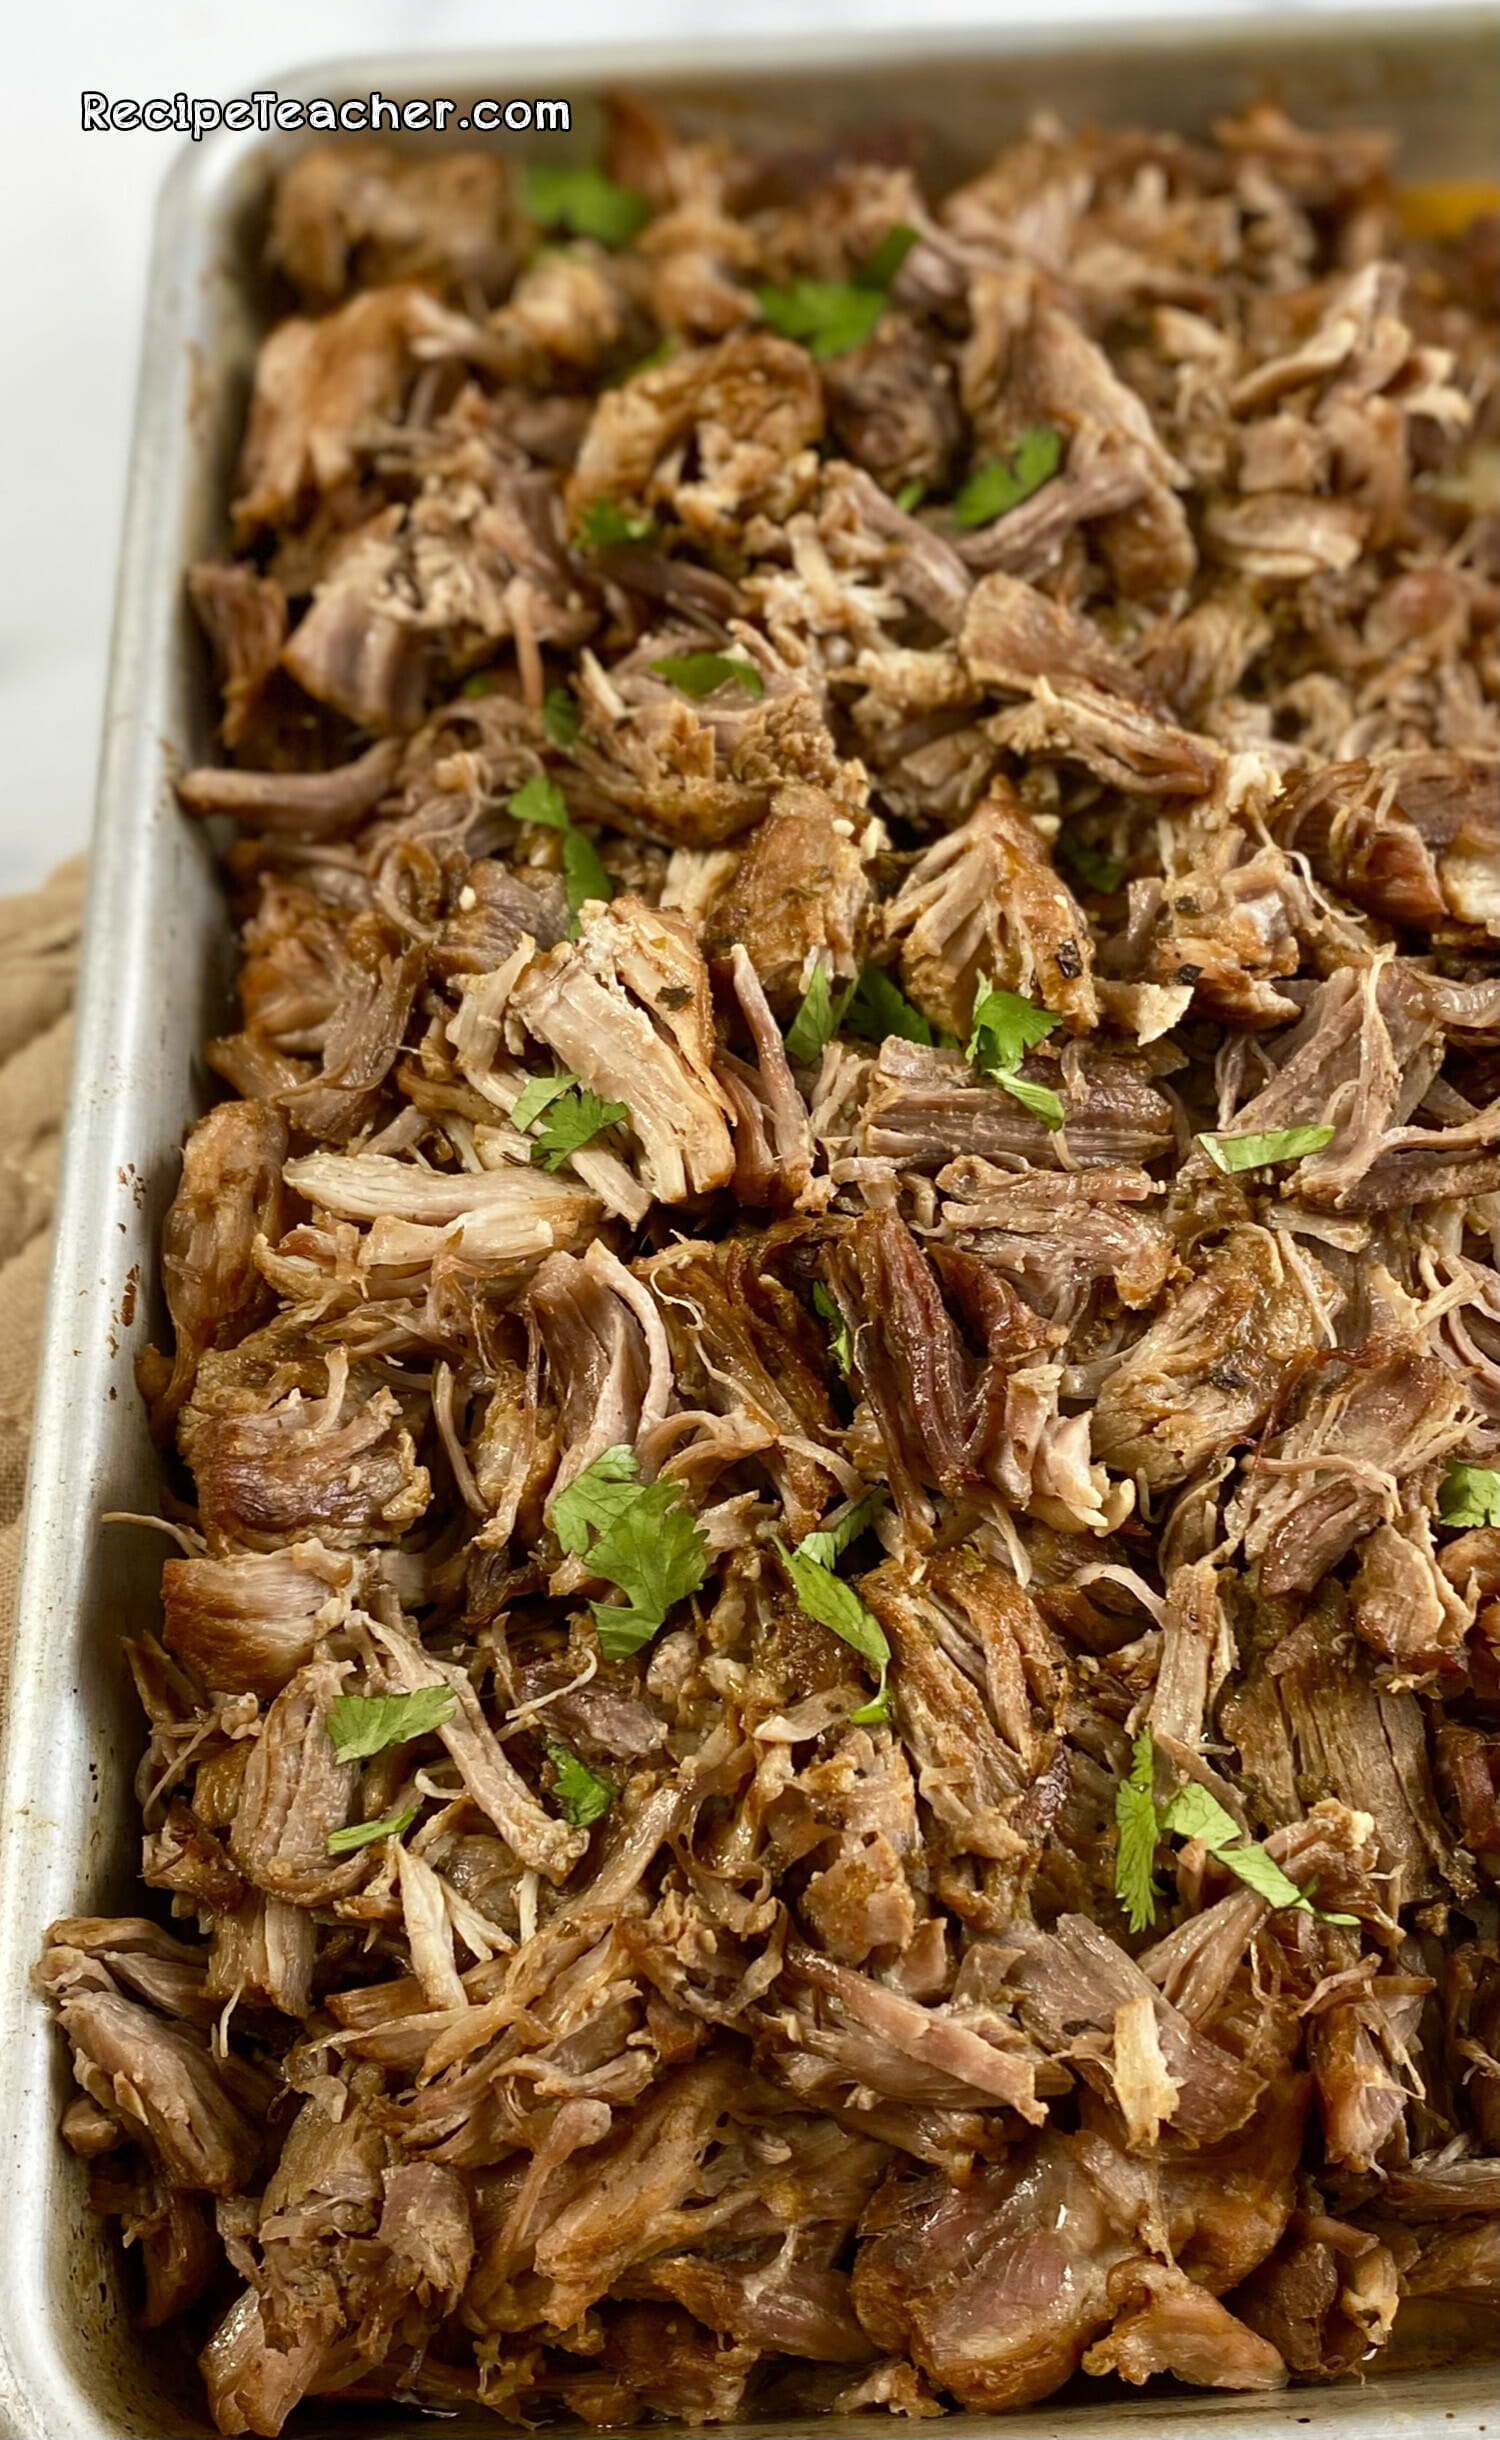 Mexican pulled pork crisped under the broiler